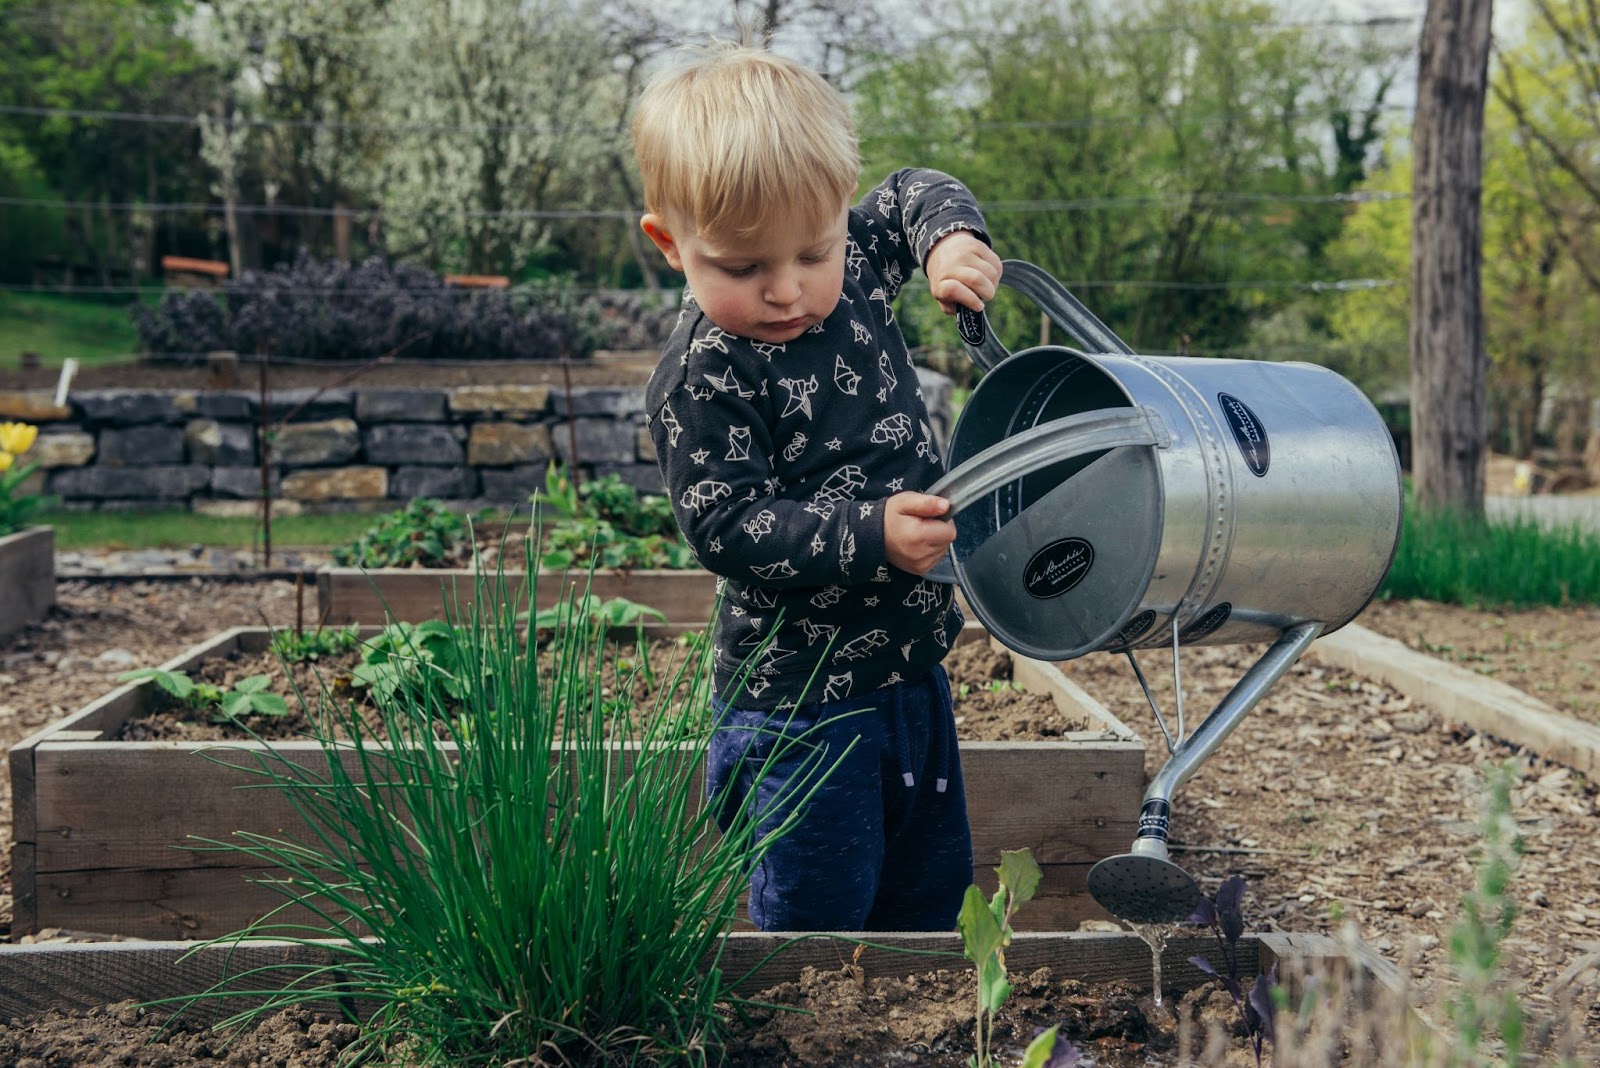 Boy in black and white long-sleeved shirt using a grey metal watering can in raised garden beds